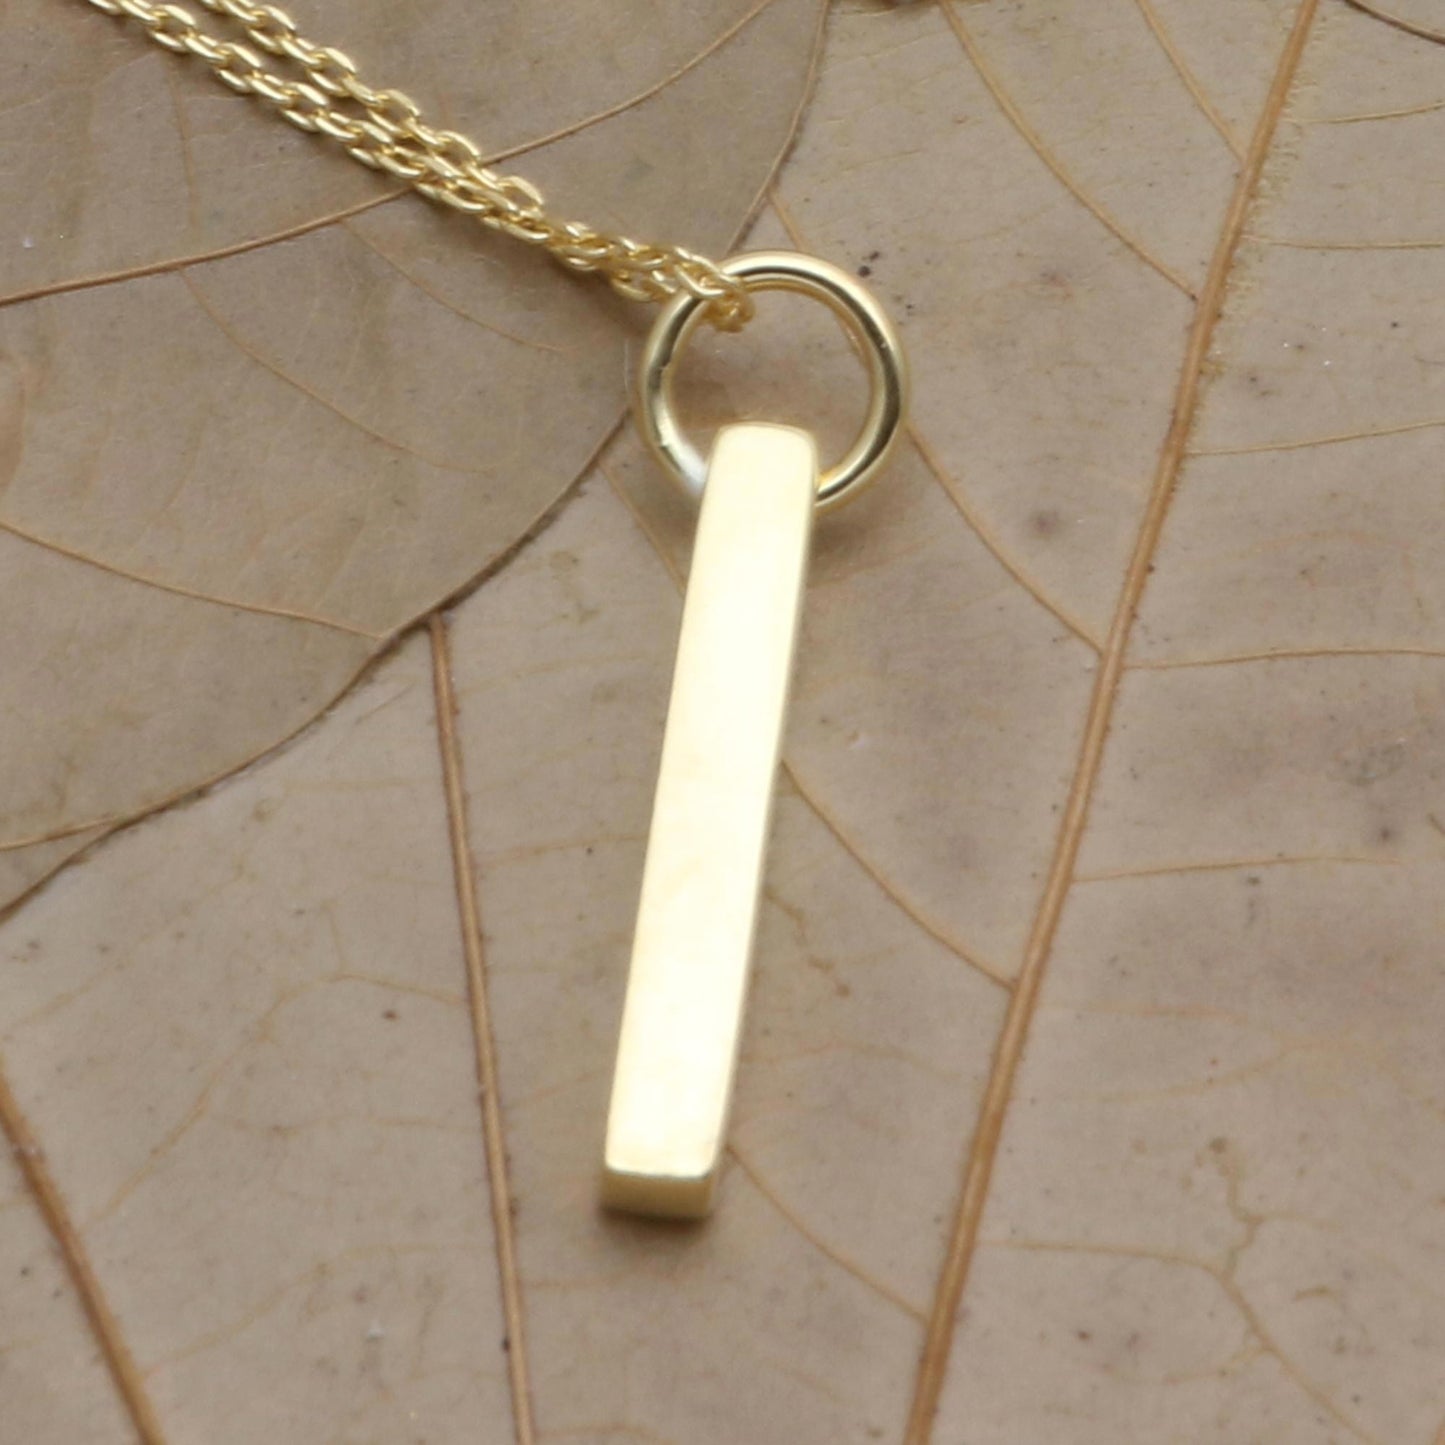 Under the Sun Hand Crafted Gold-Plated Sterling Silver Pendant Necklace